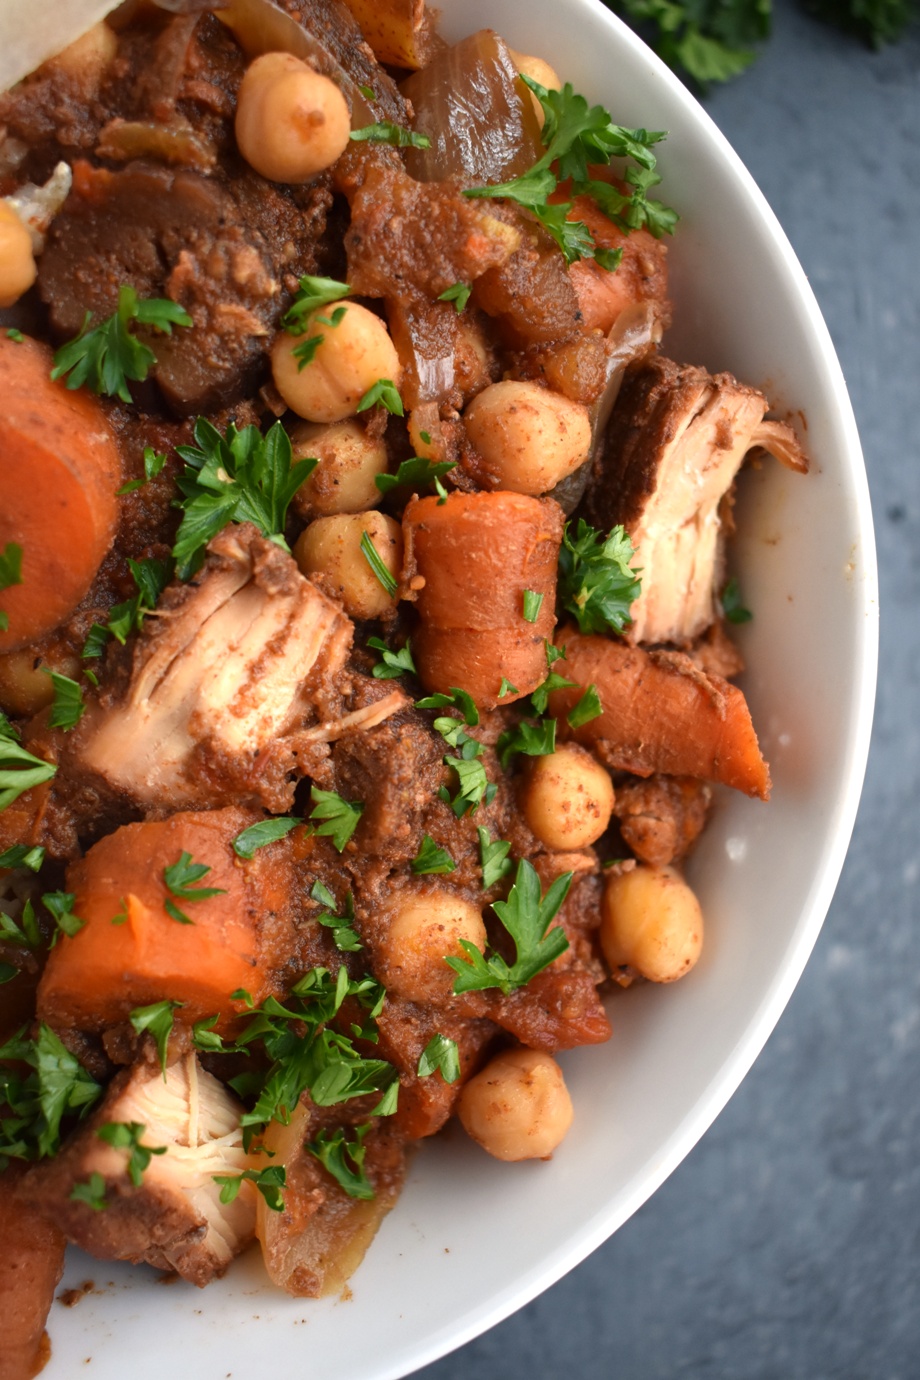 Slow Cooker Moroccan Chicken is loaded with flavor, tender chicken, carrots, chickpeas, pears, Moroccan spices and more for the perfect cozy meal! Serve over brown rice, cauliflower rice or quinoa. www.nutritionistreviews.com #healthy #cleaneating #dinner #slowcooker #chicken #crockpot